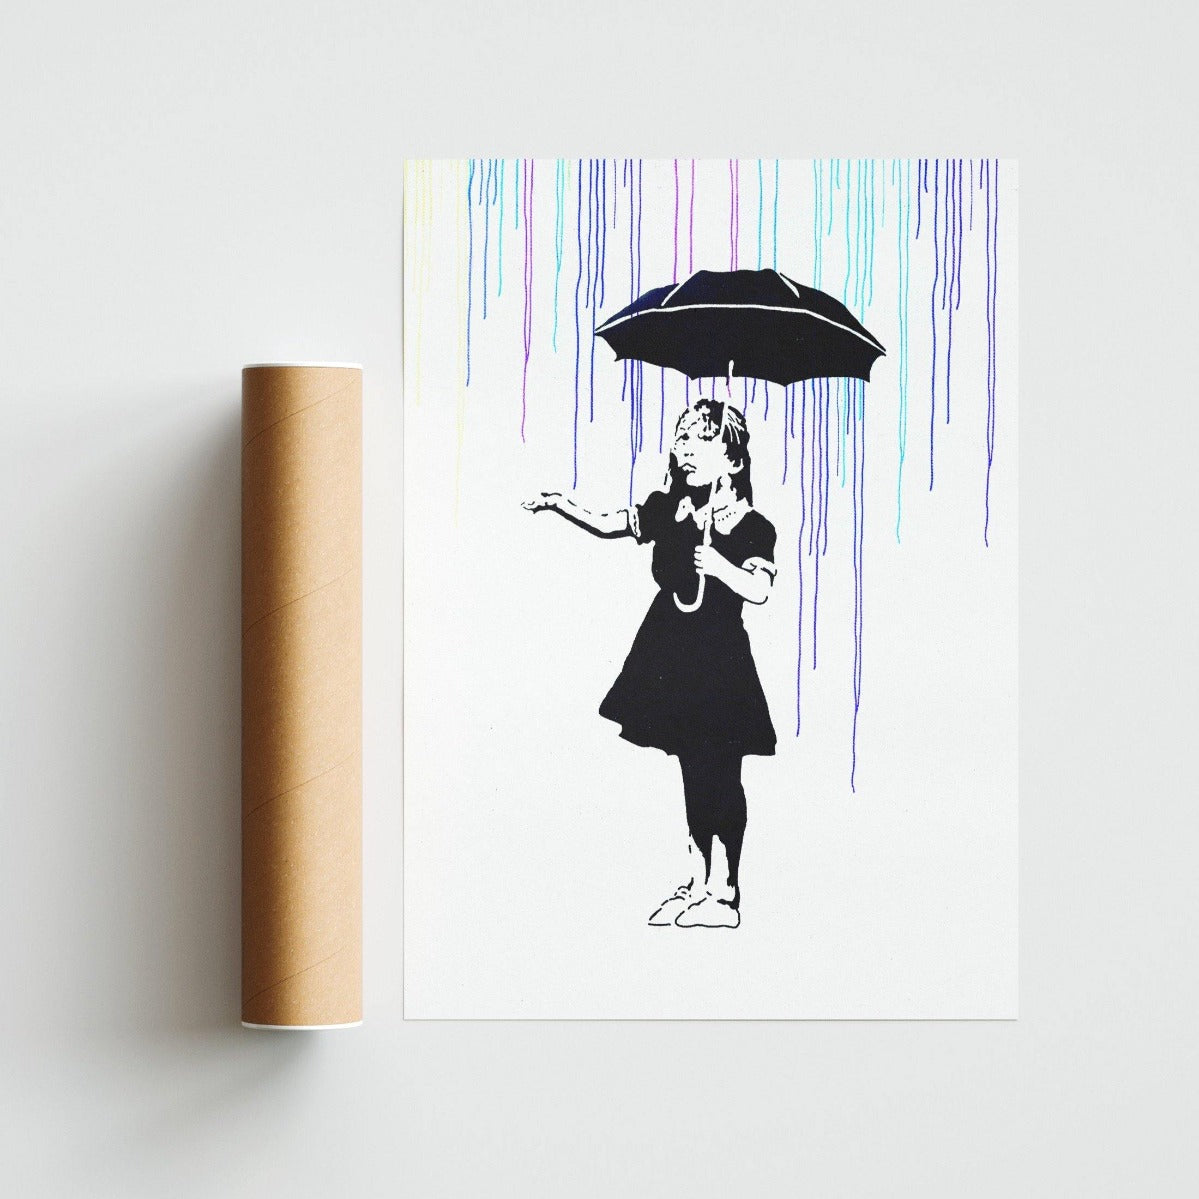 Add some edge to your walls with this Banksy street art print. Painted in 2002, "Girl With Umbrella" is one of Banksy's most popular works. Depicting a young girl shielding herself from the rain, this print is a must-have for any street art enthusiast. Perfect for any room, this print is a great way to add some personality to your space. - 98types